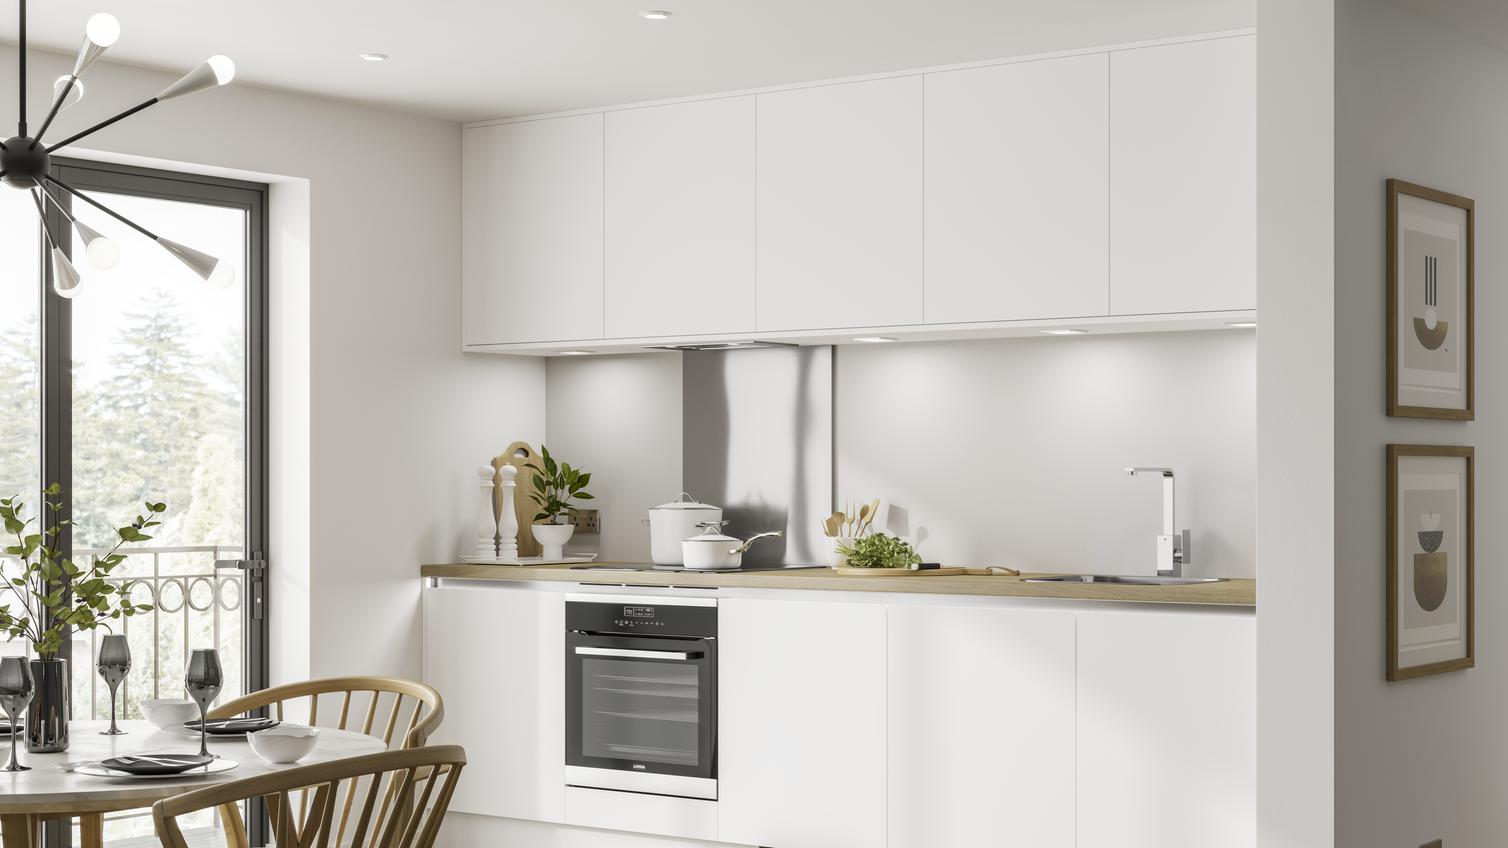 White matt handleless kitchen in single wall layout with under cabinet lighting, wood worktop and built under electric oven.